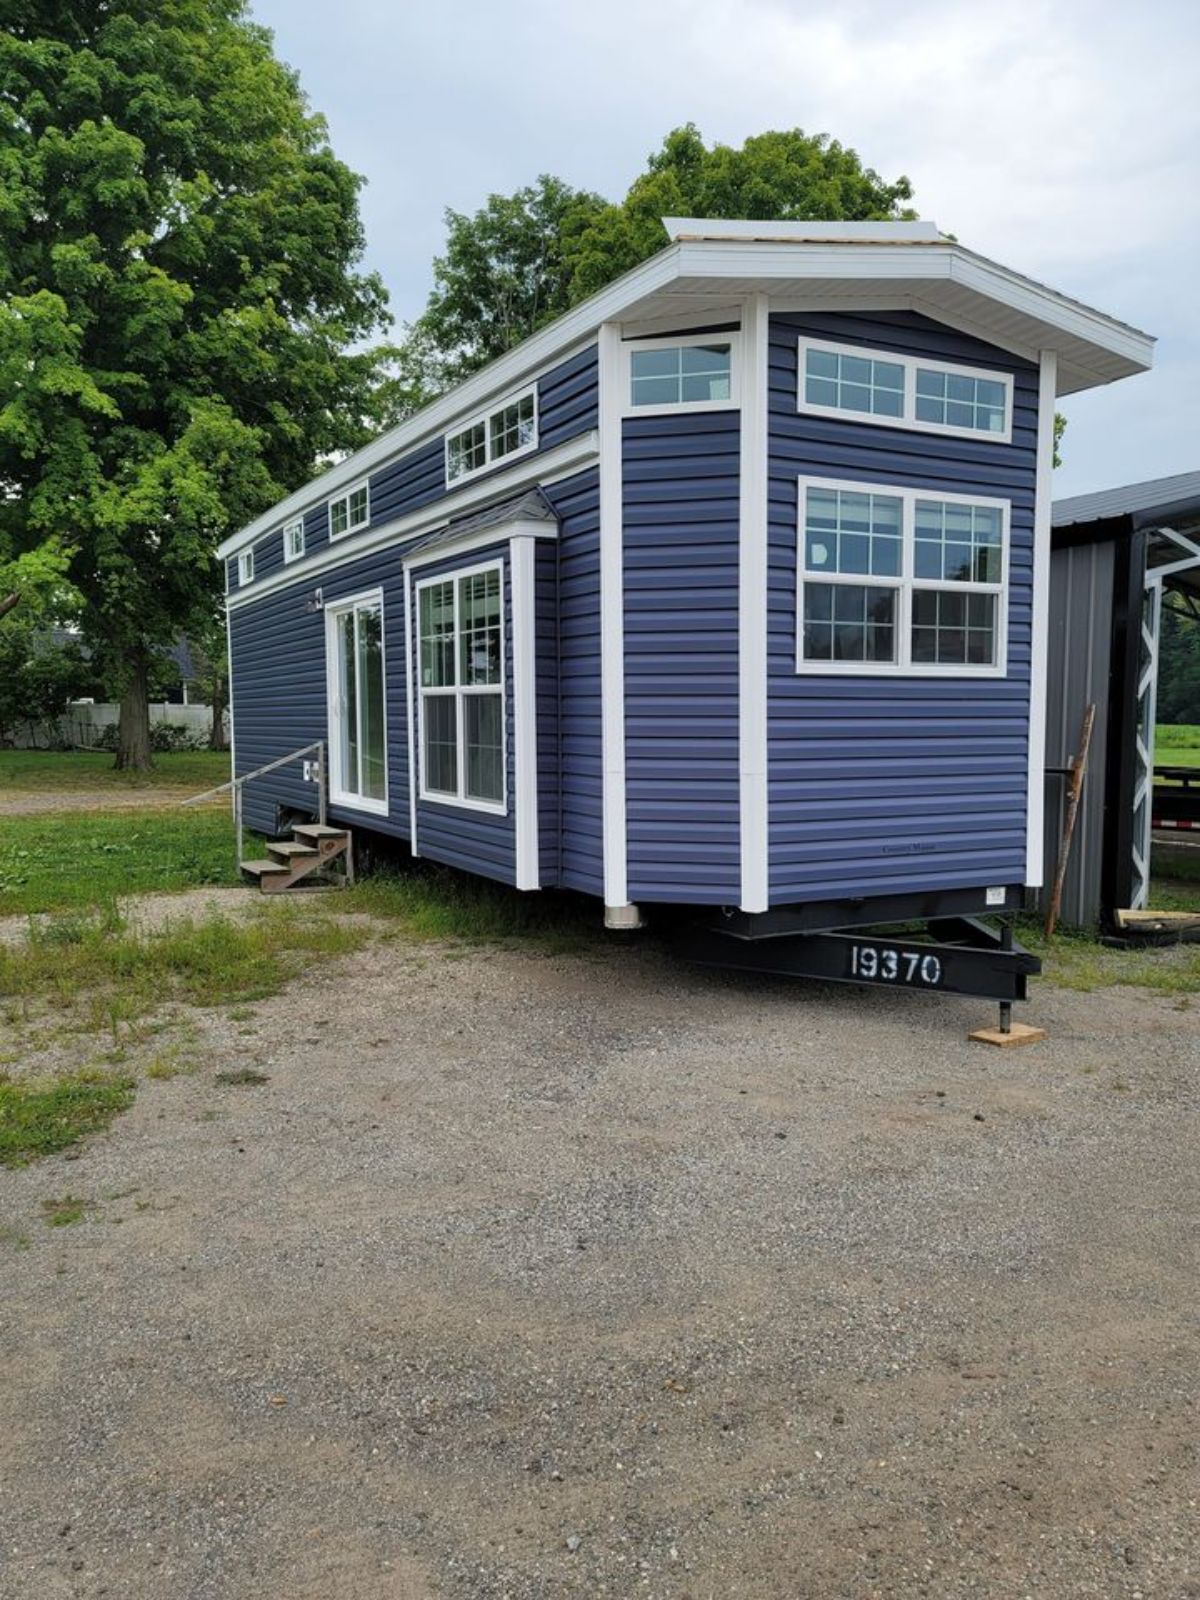 Stunning exterior of 399 sf park model tiny home